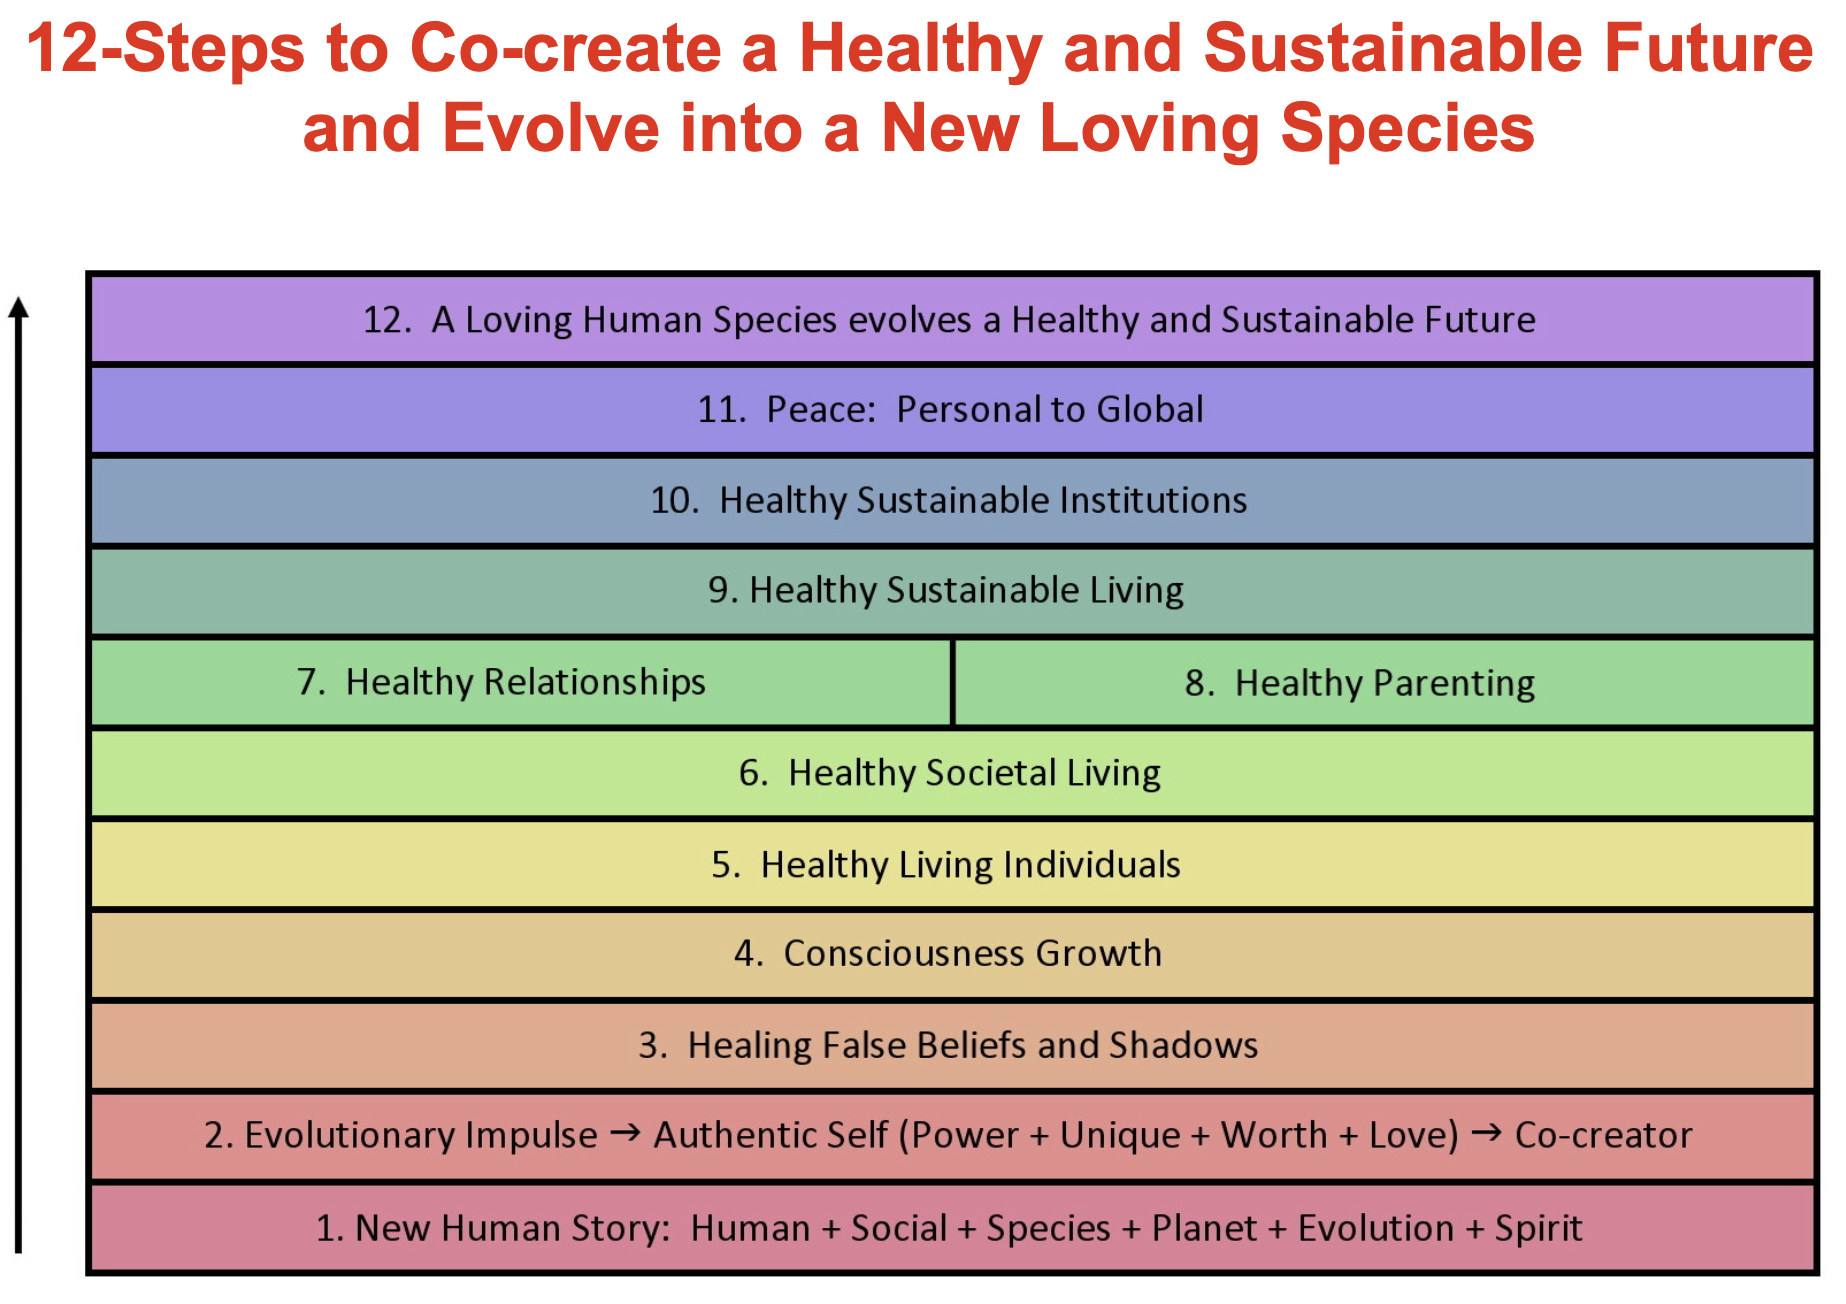 12-Steps to Co-create a Healthy and Sustainable Future and Evolve into a New Loving Species